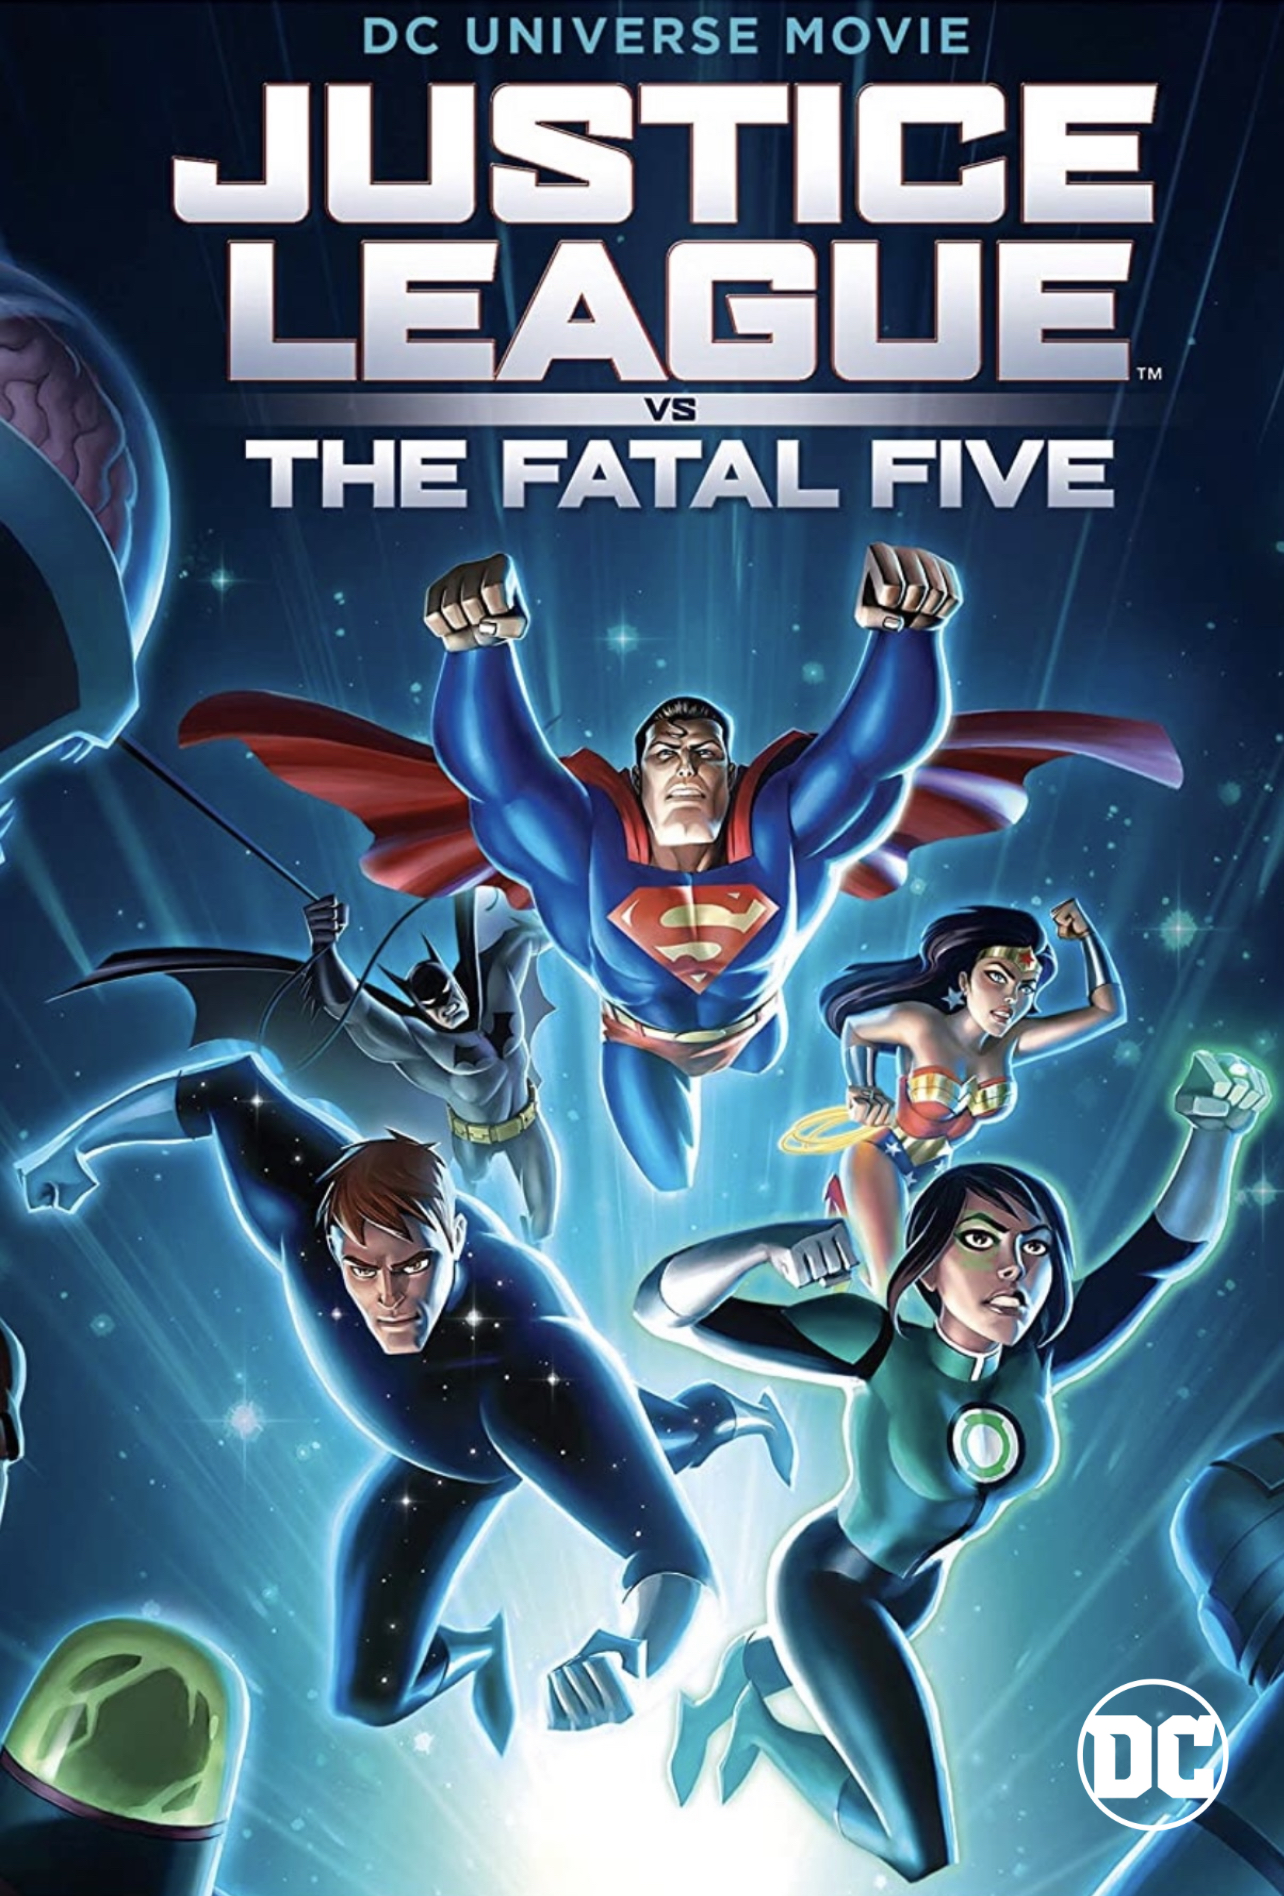 Justice League vs. the Fatal Five best dc animated movies